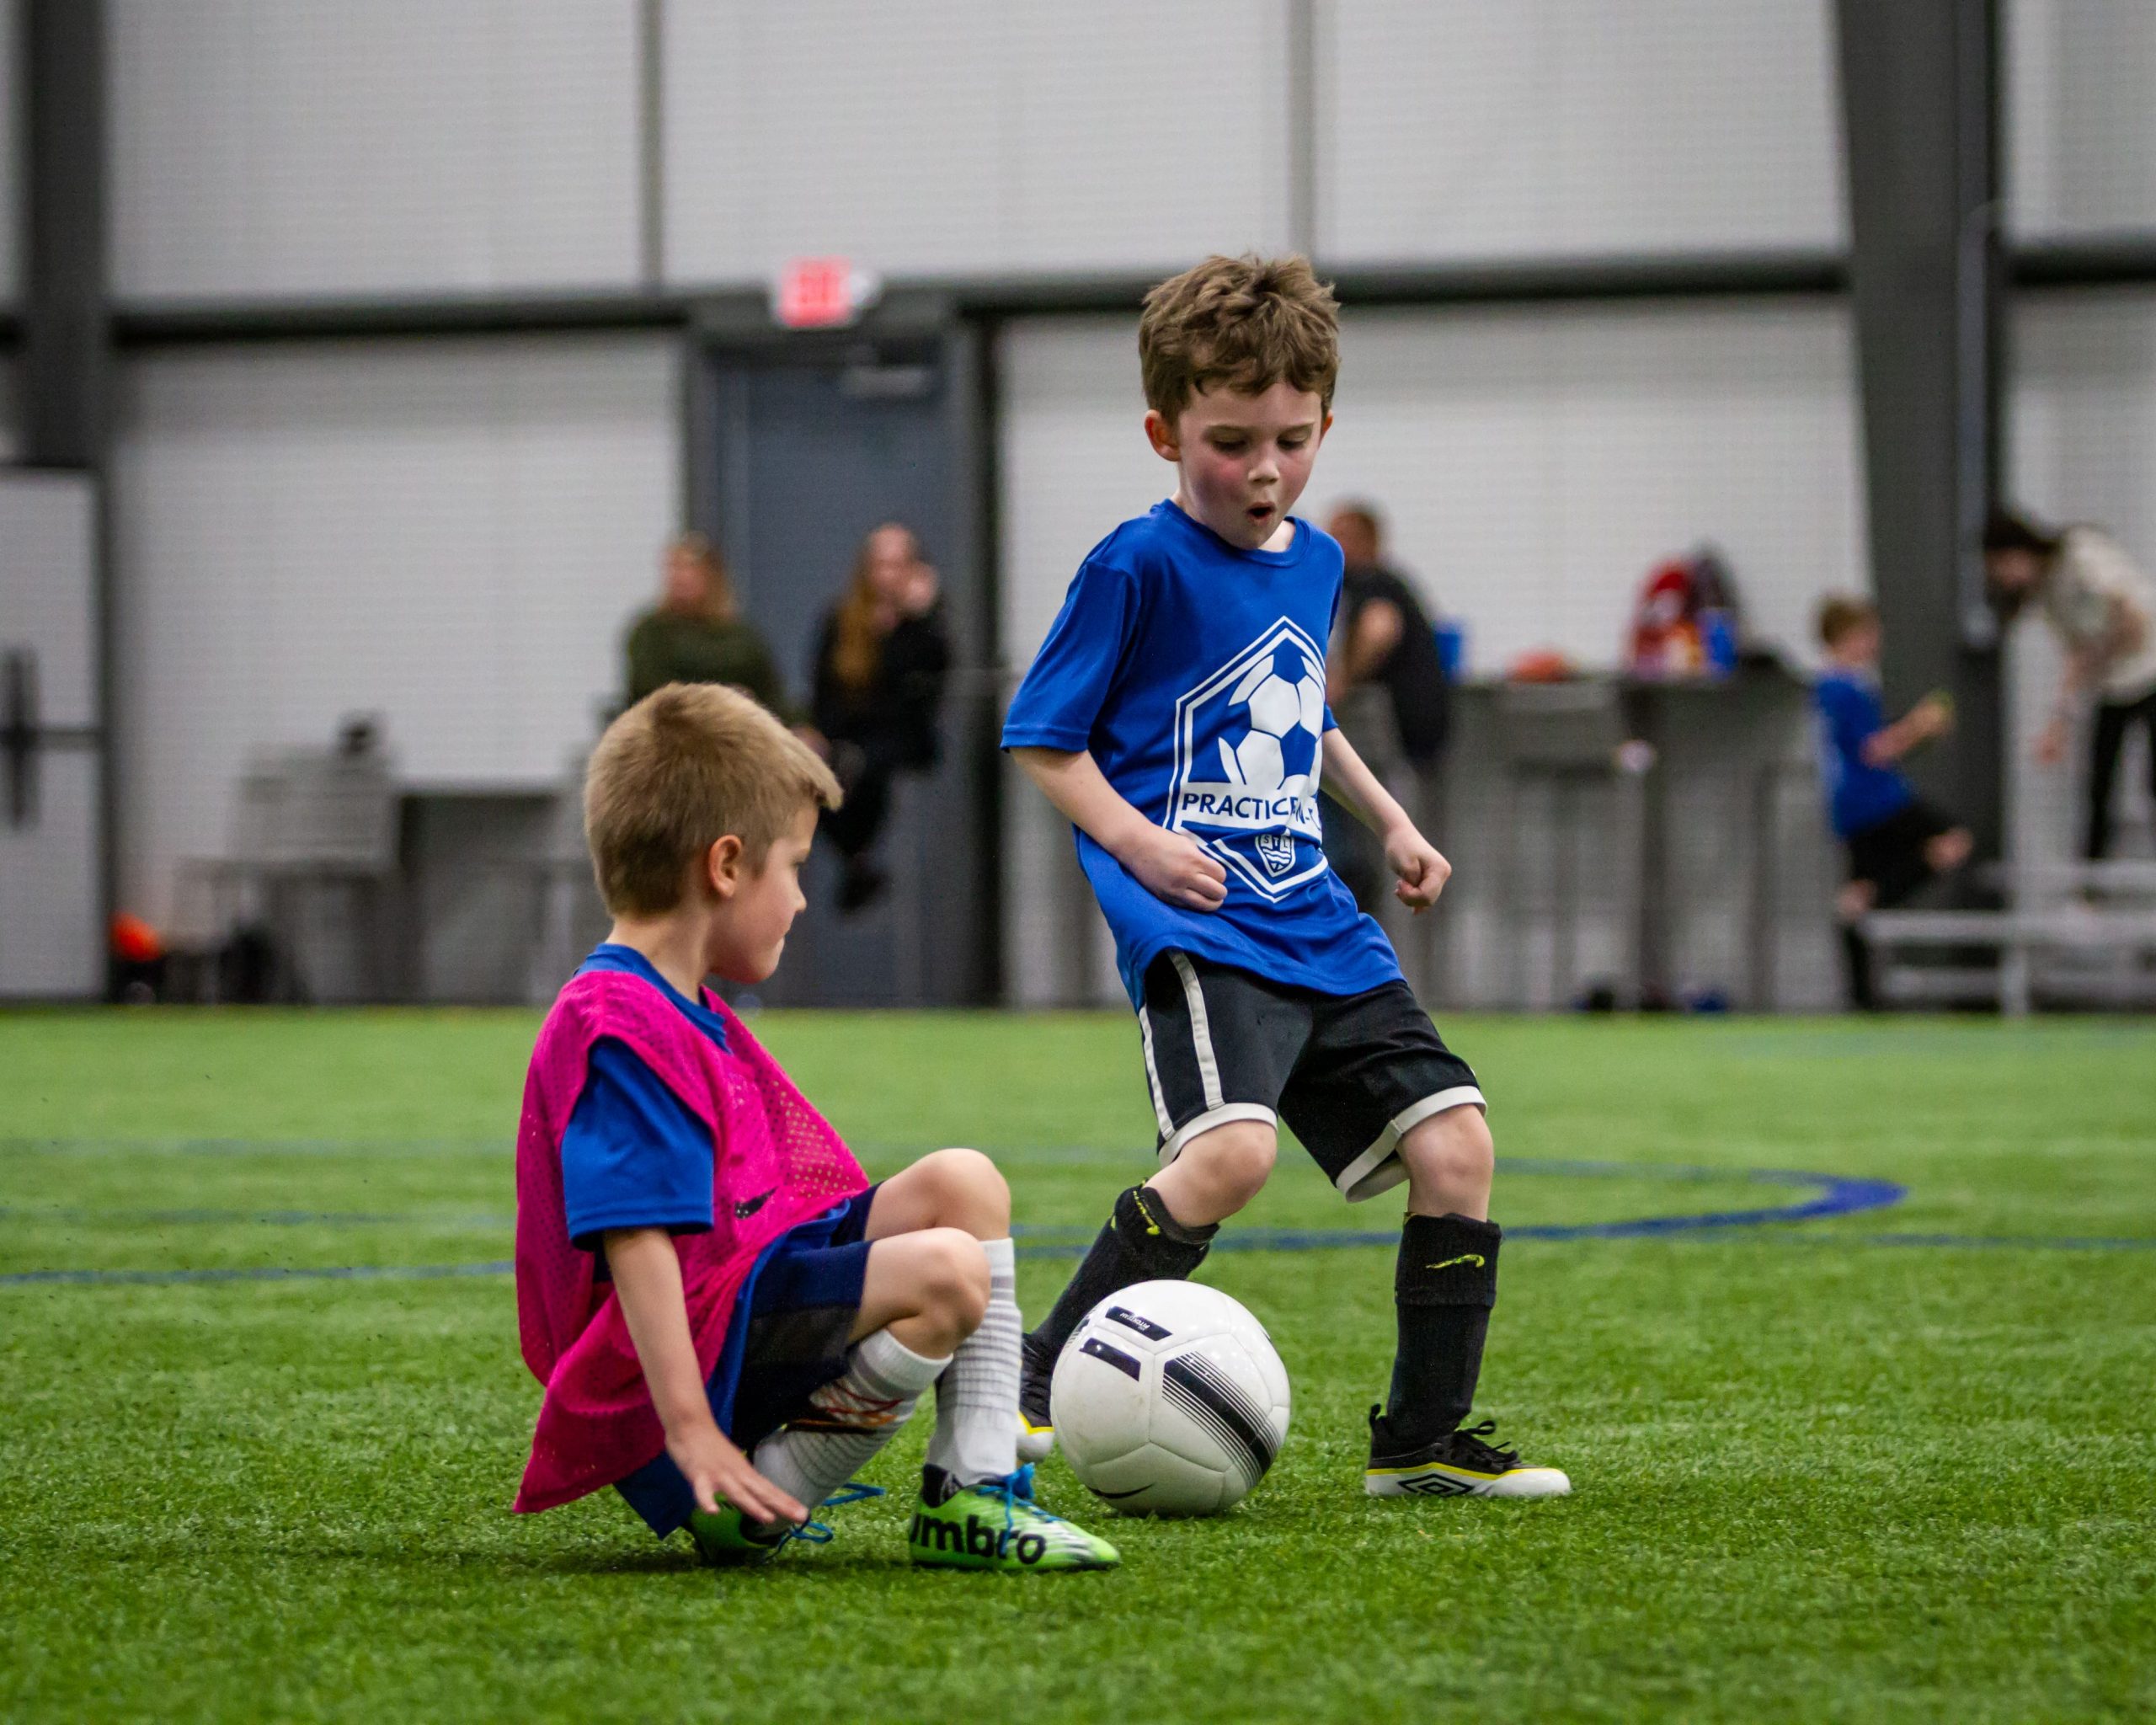 St Louis Practice and Play Soccer Camps